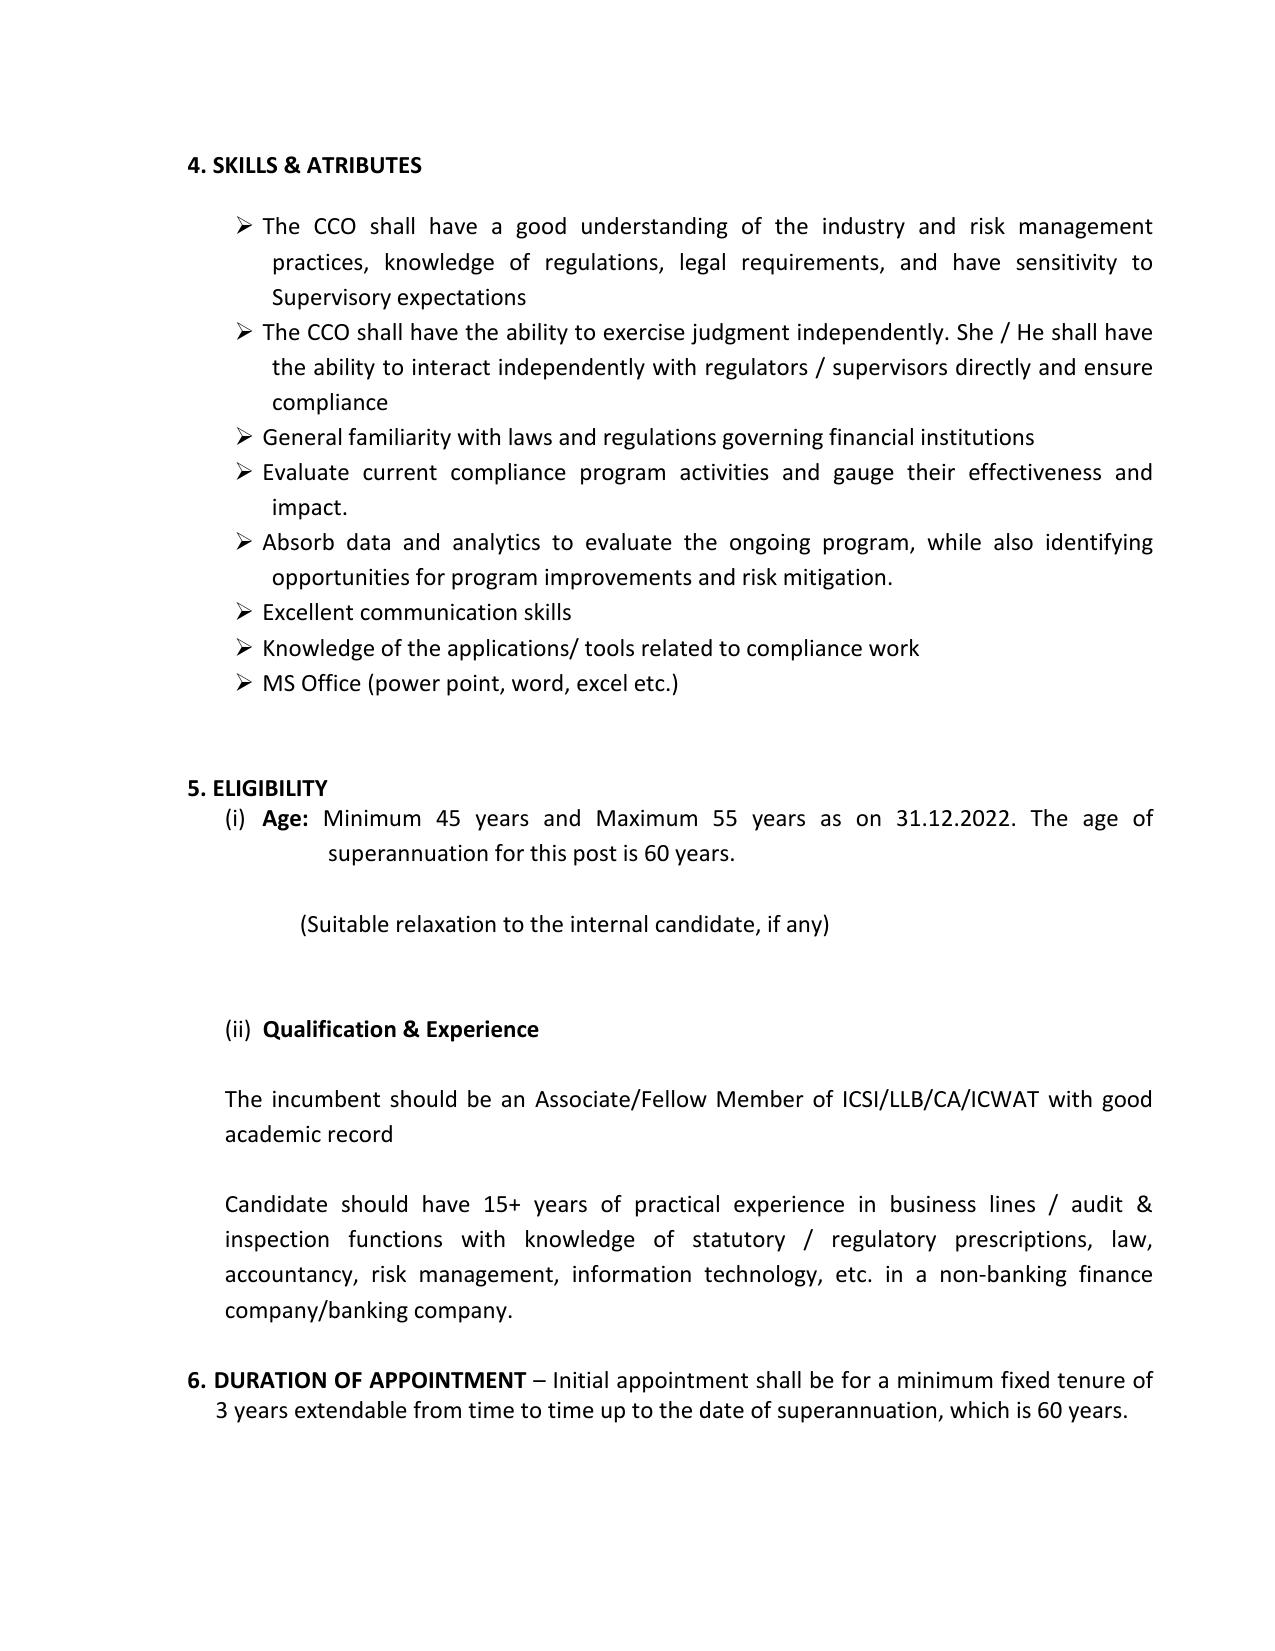 PTC India Limited Invites Application for Chief Compliance Officer Recruitment 2023 - Page 2